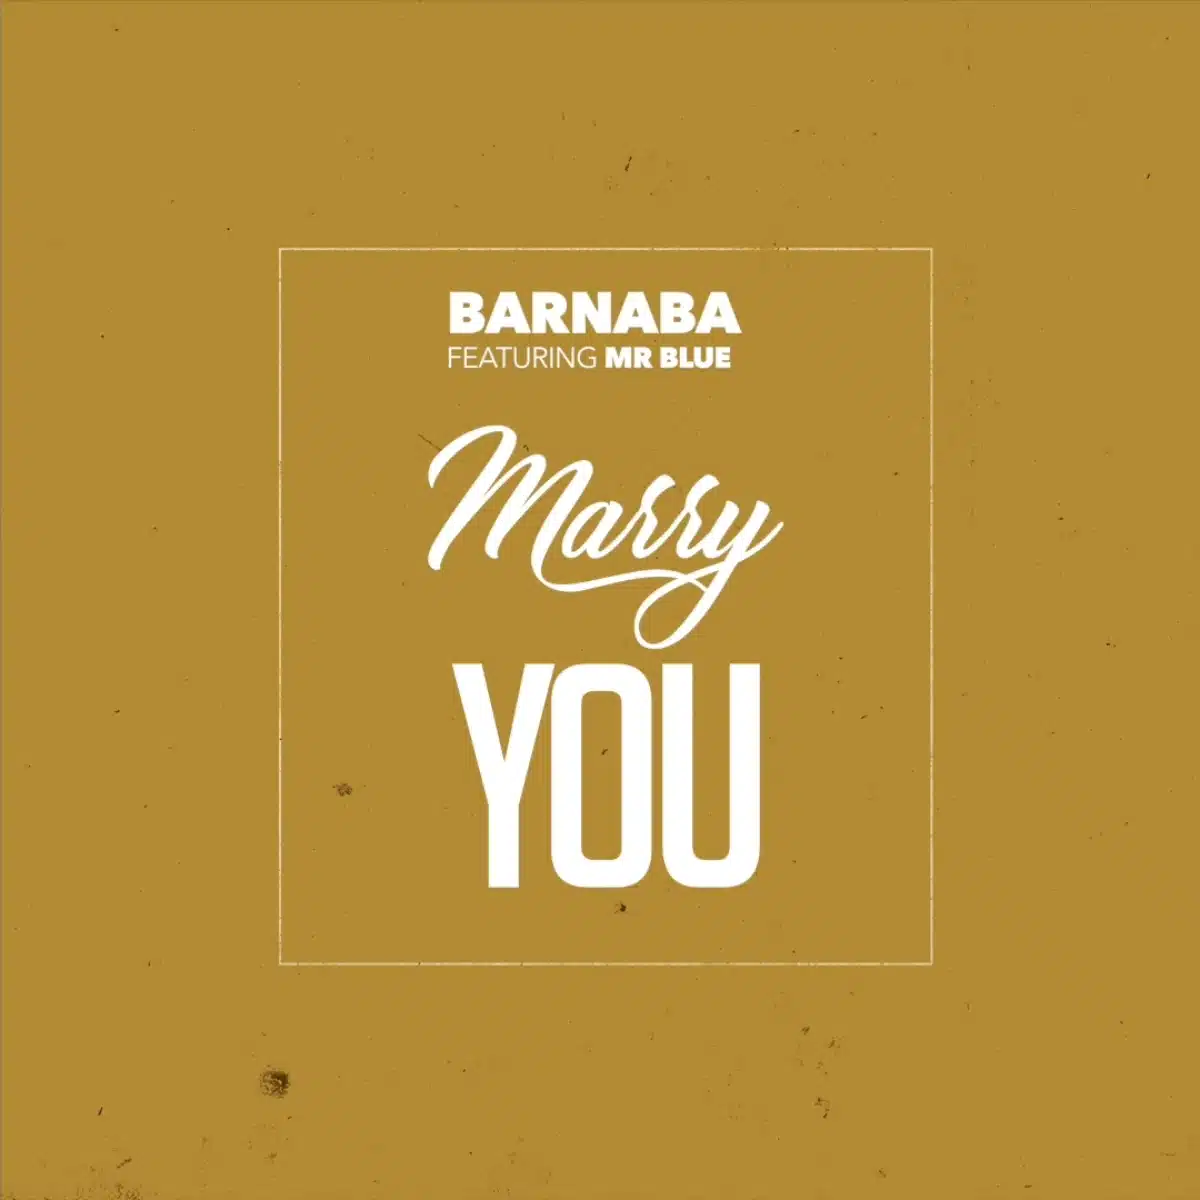 DOWNLOAD: Barnaba Ft Mr Blue – “Mary You” Mp3